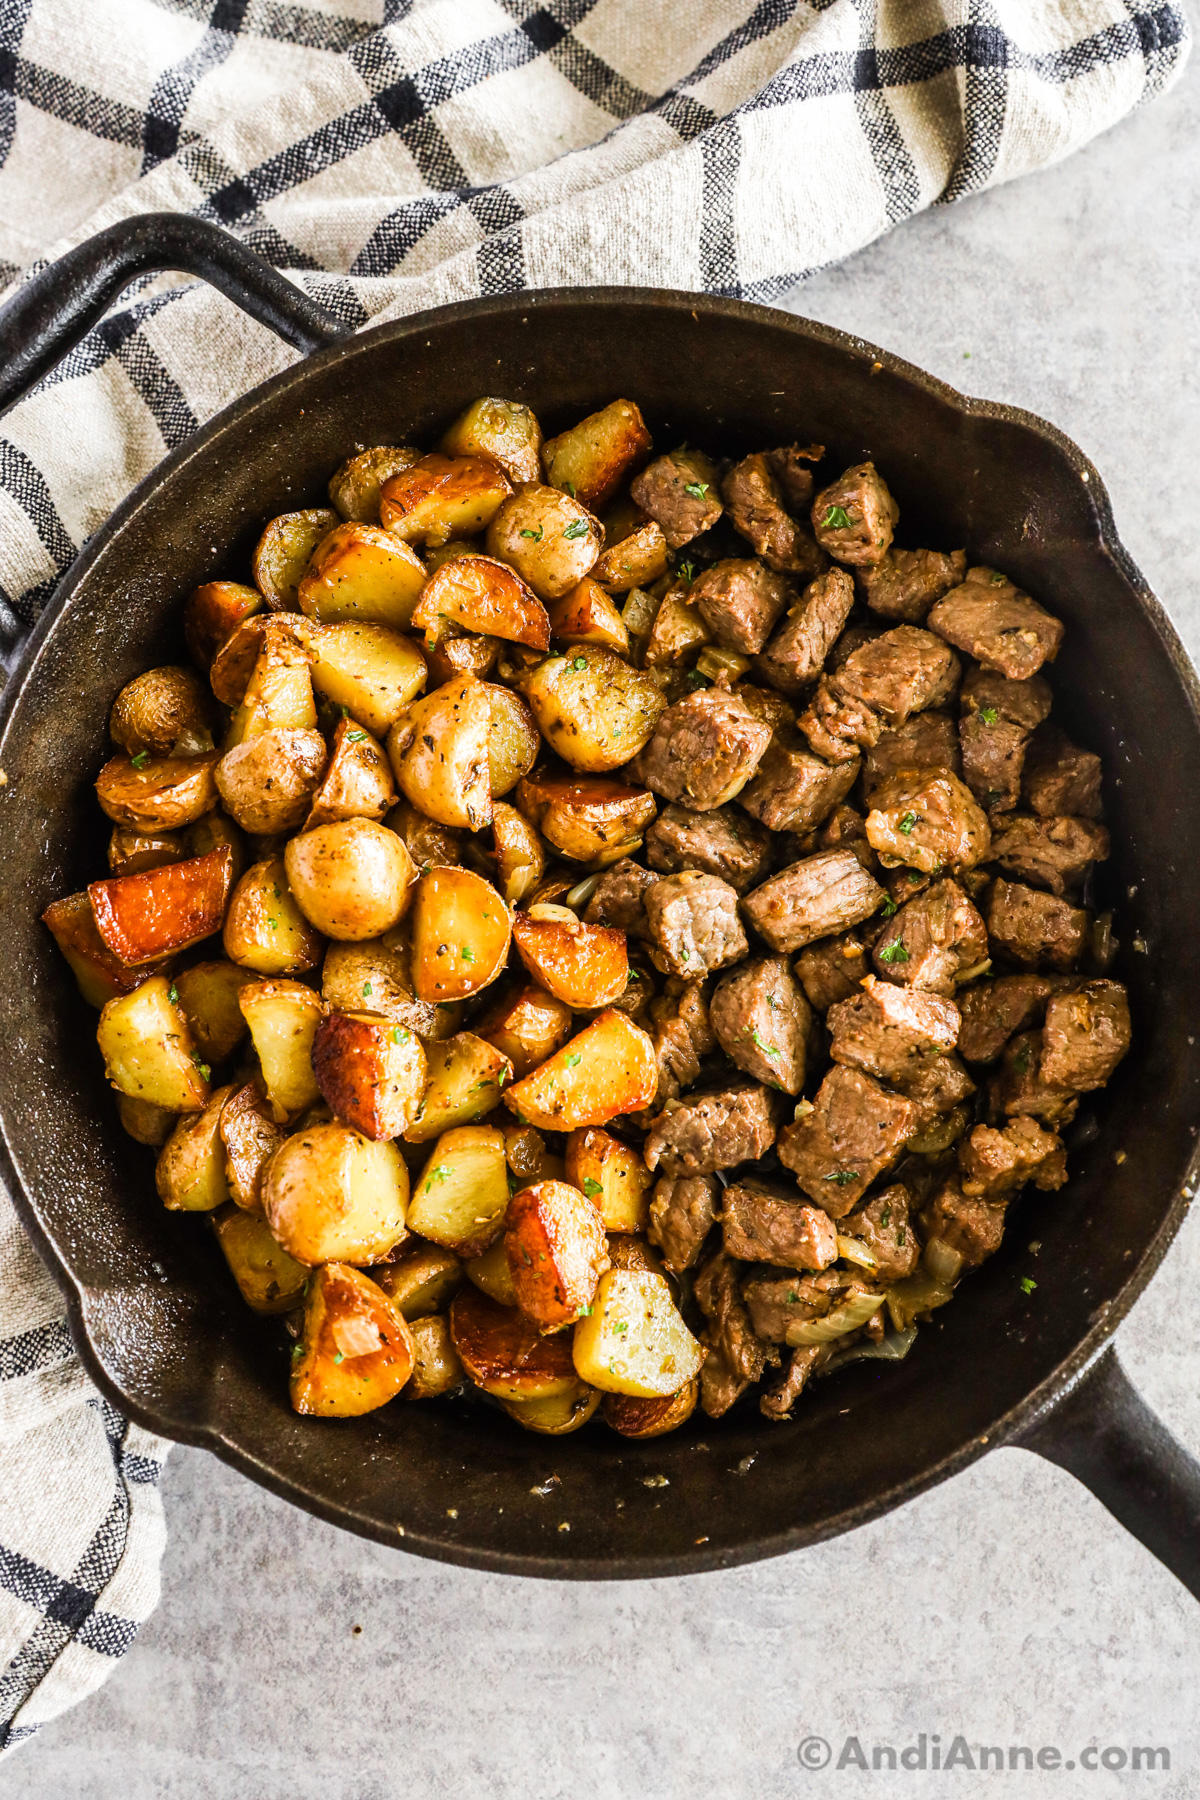 Frying pan with cooked mini potatoes and steak bites.